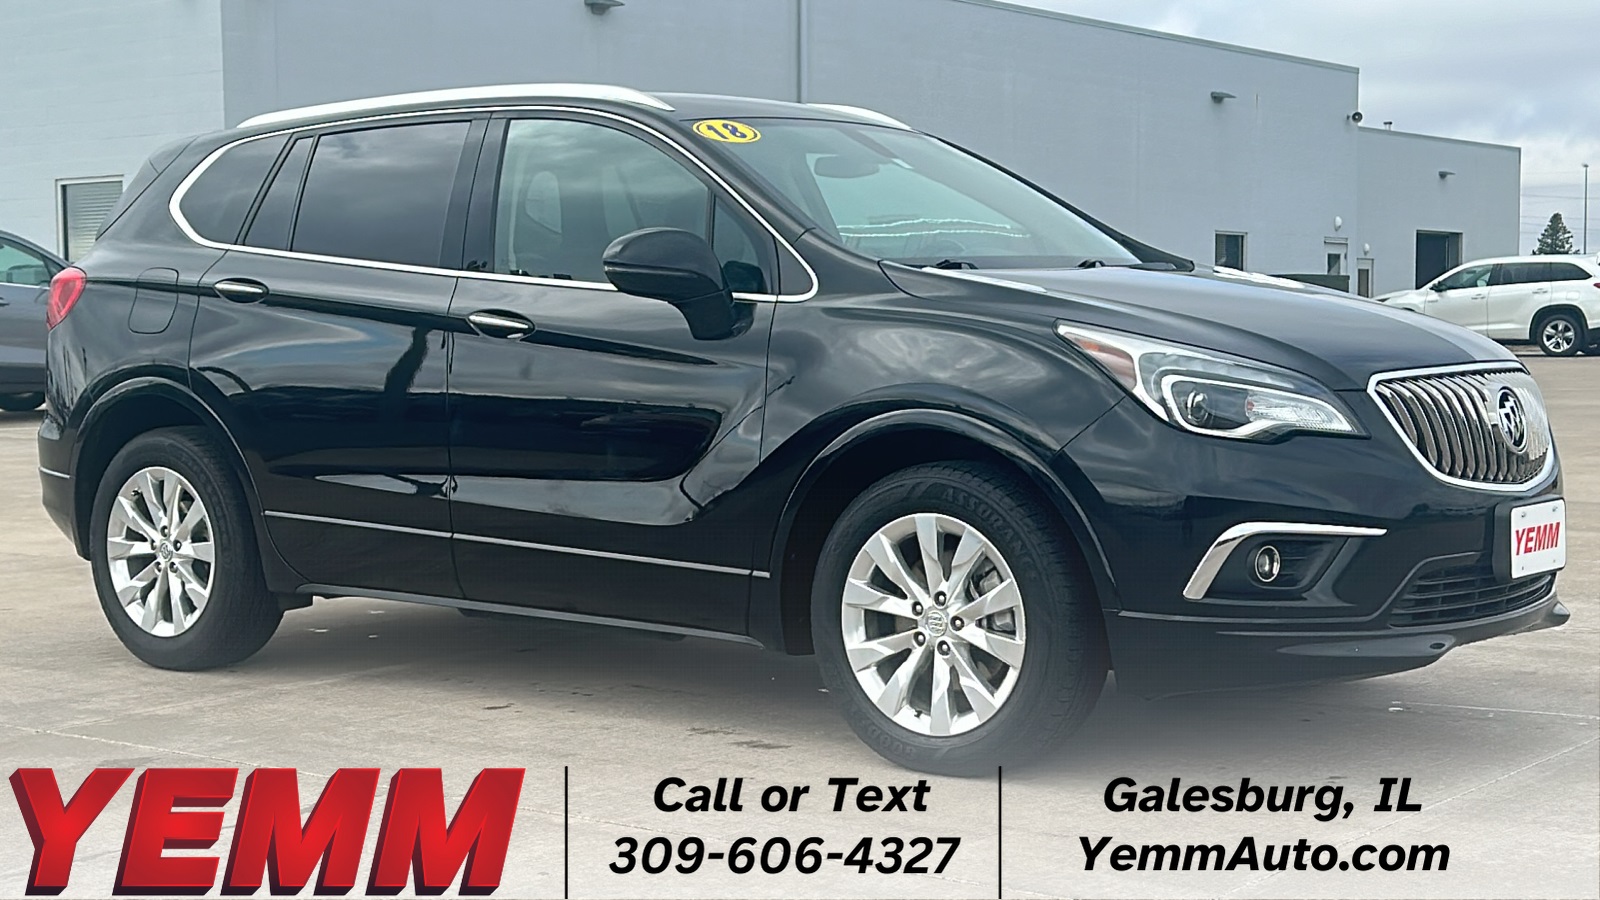 2018 Buick Envision Galesburg IL